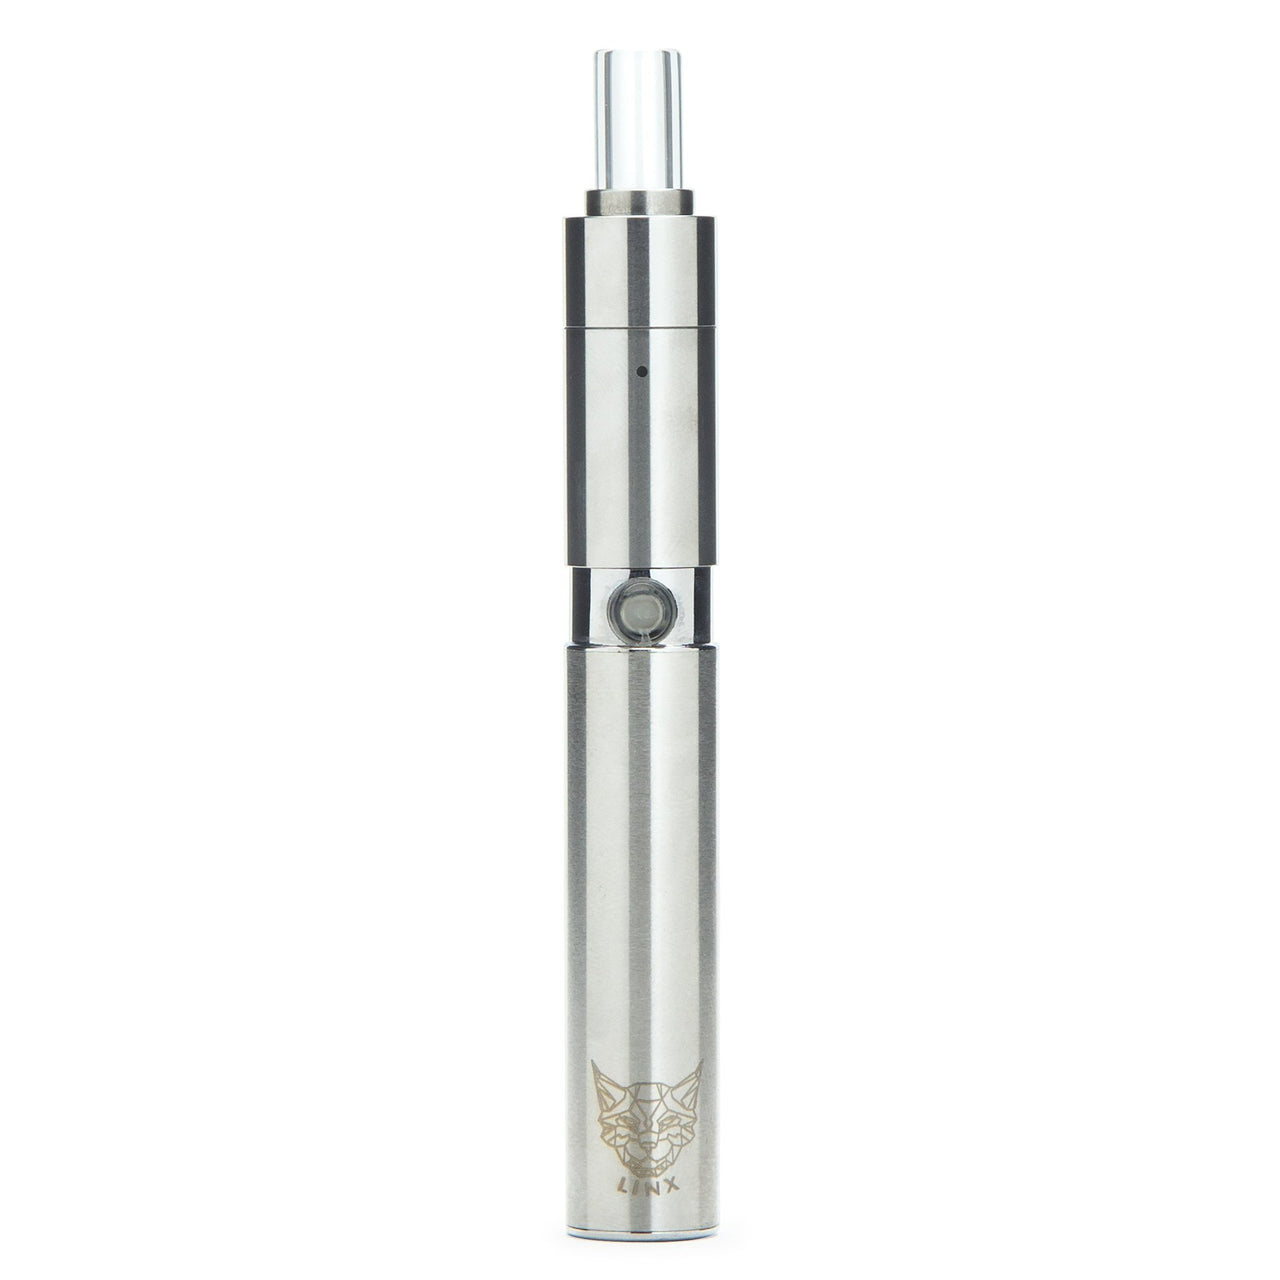 LINX Hypnos Zero Dab Pen - Steel - 420 Science - The most trusted online smoke shop.